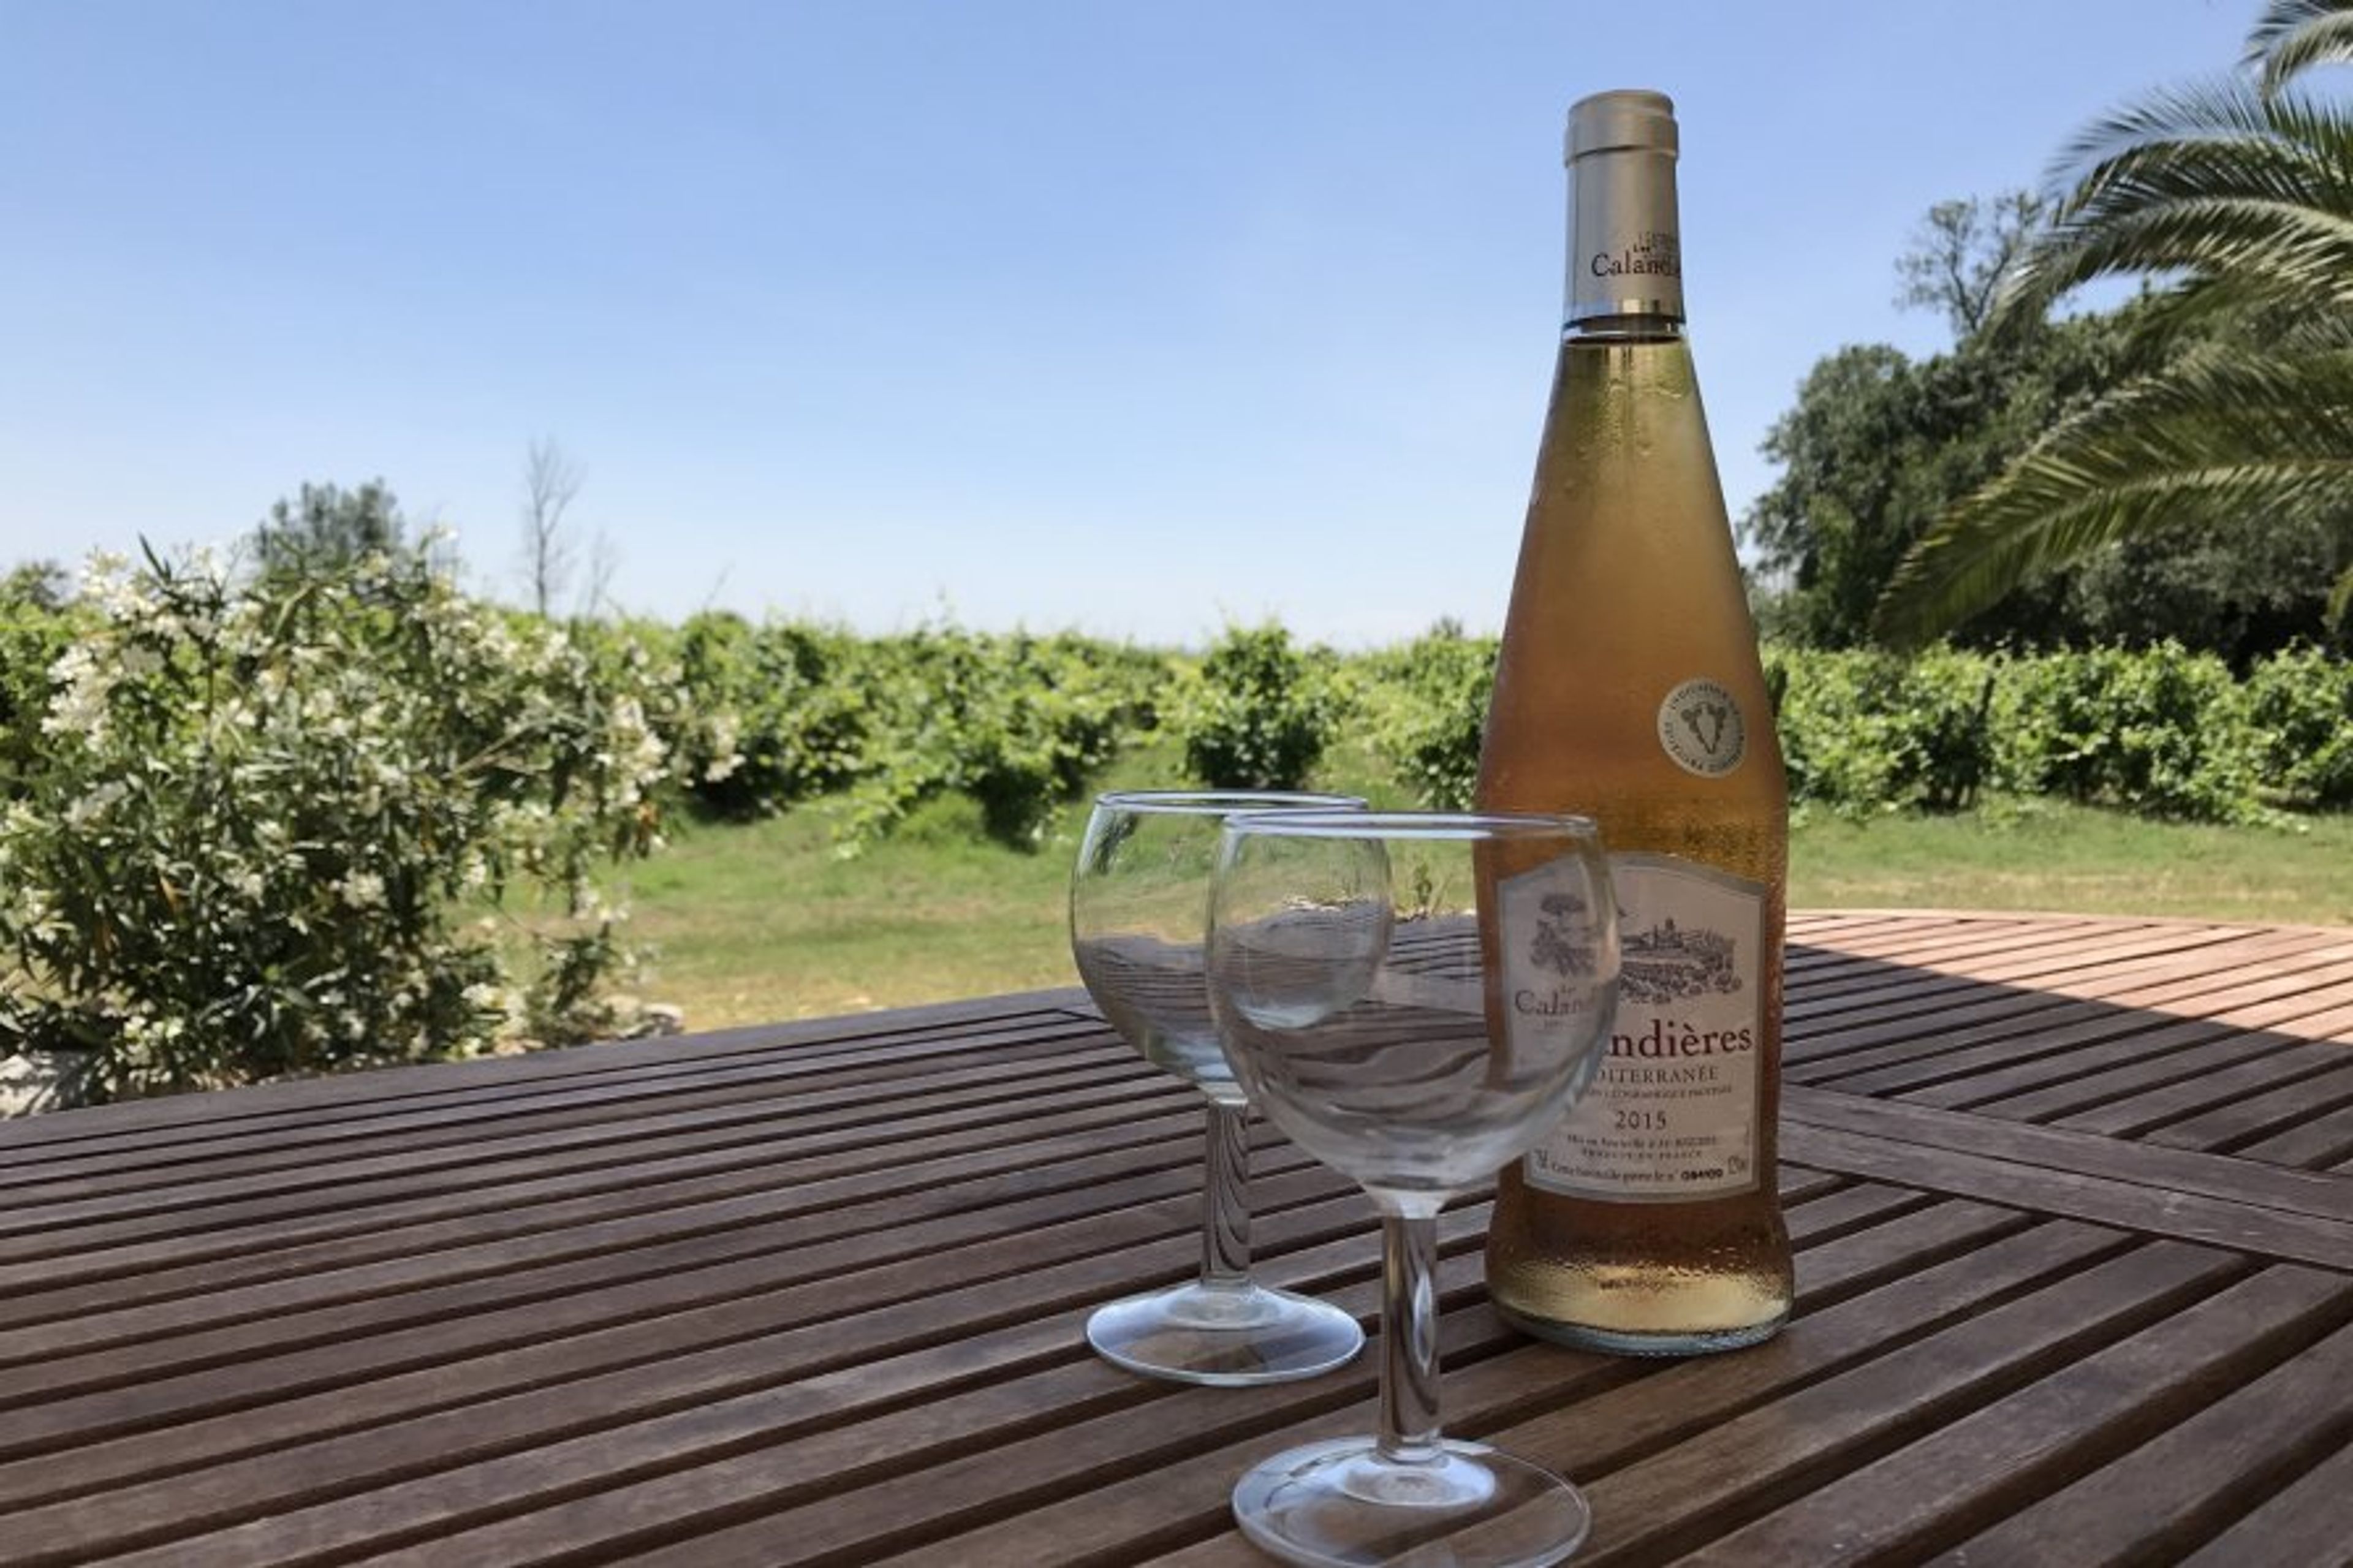 Relax on the terrace with local wine